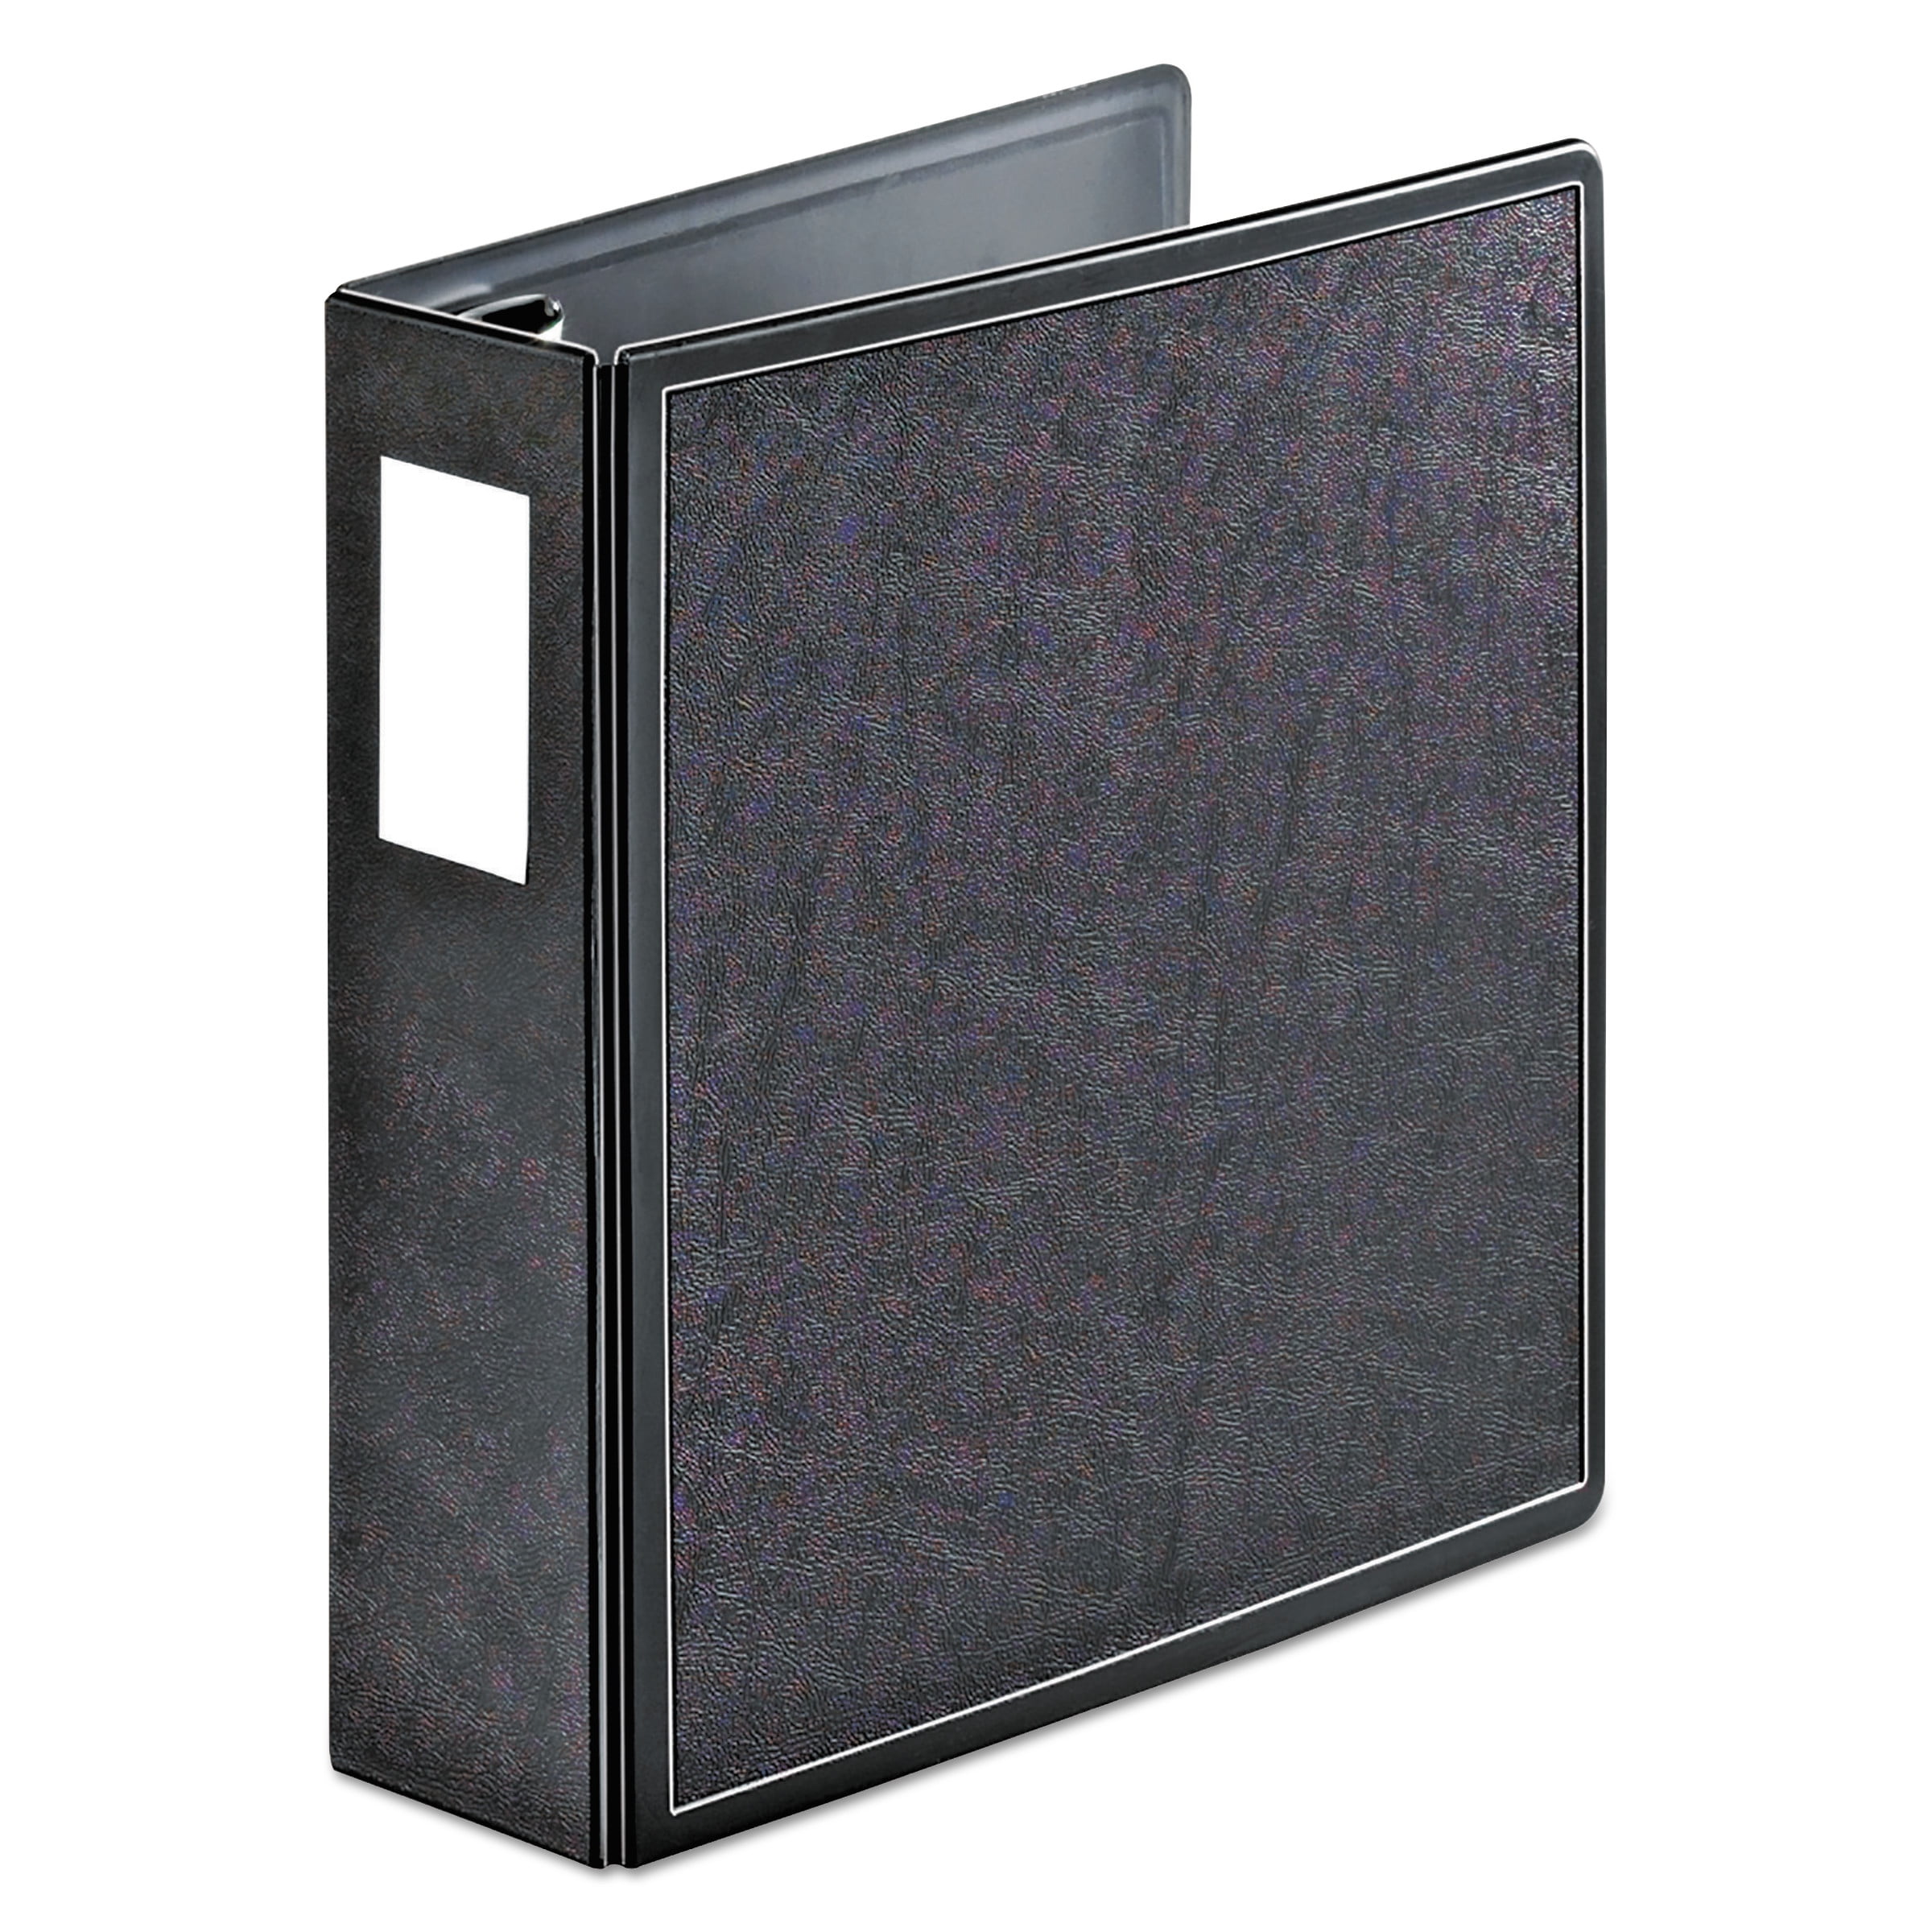 Details about   Cardinal 3 Ring Binder 2 Inch Premier Easy Open Binder ONE-Touch Locking Slant 